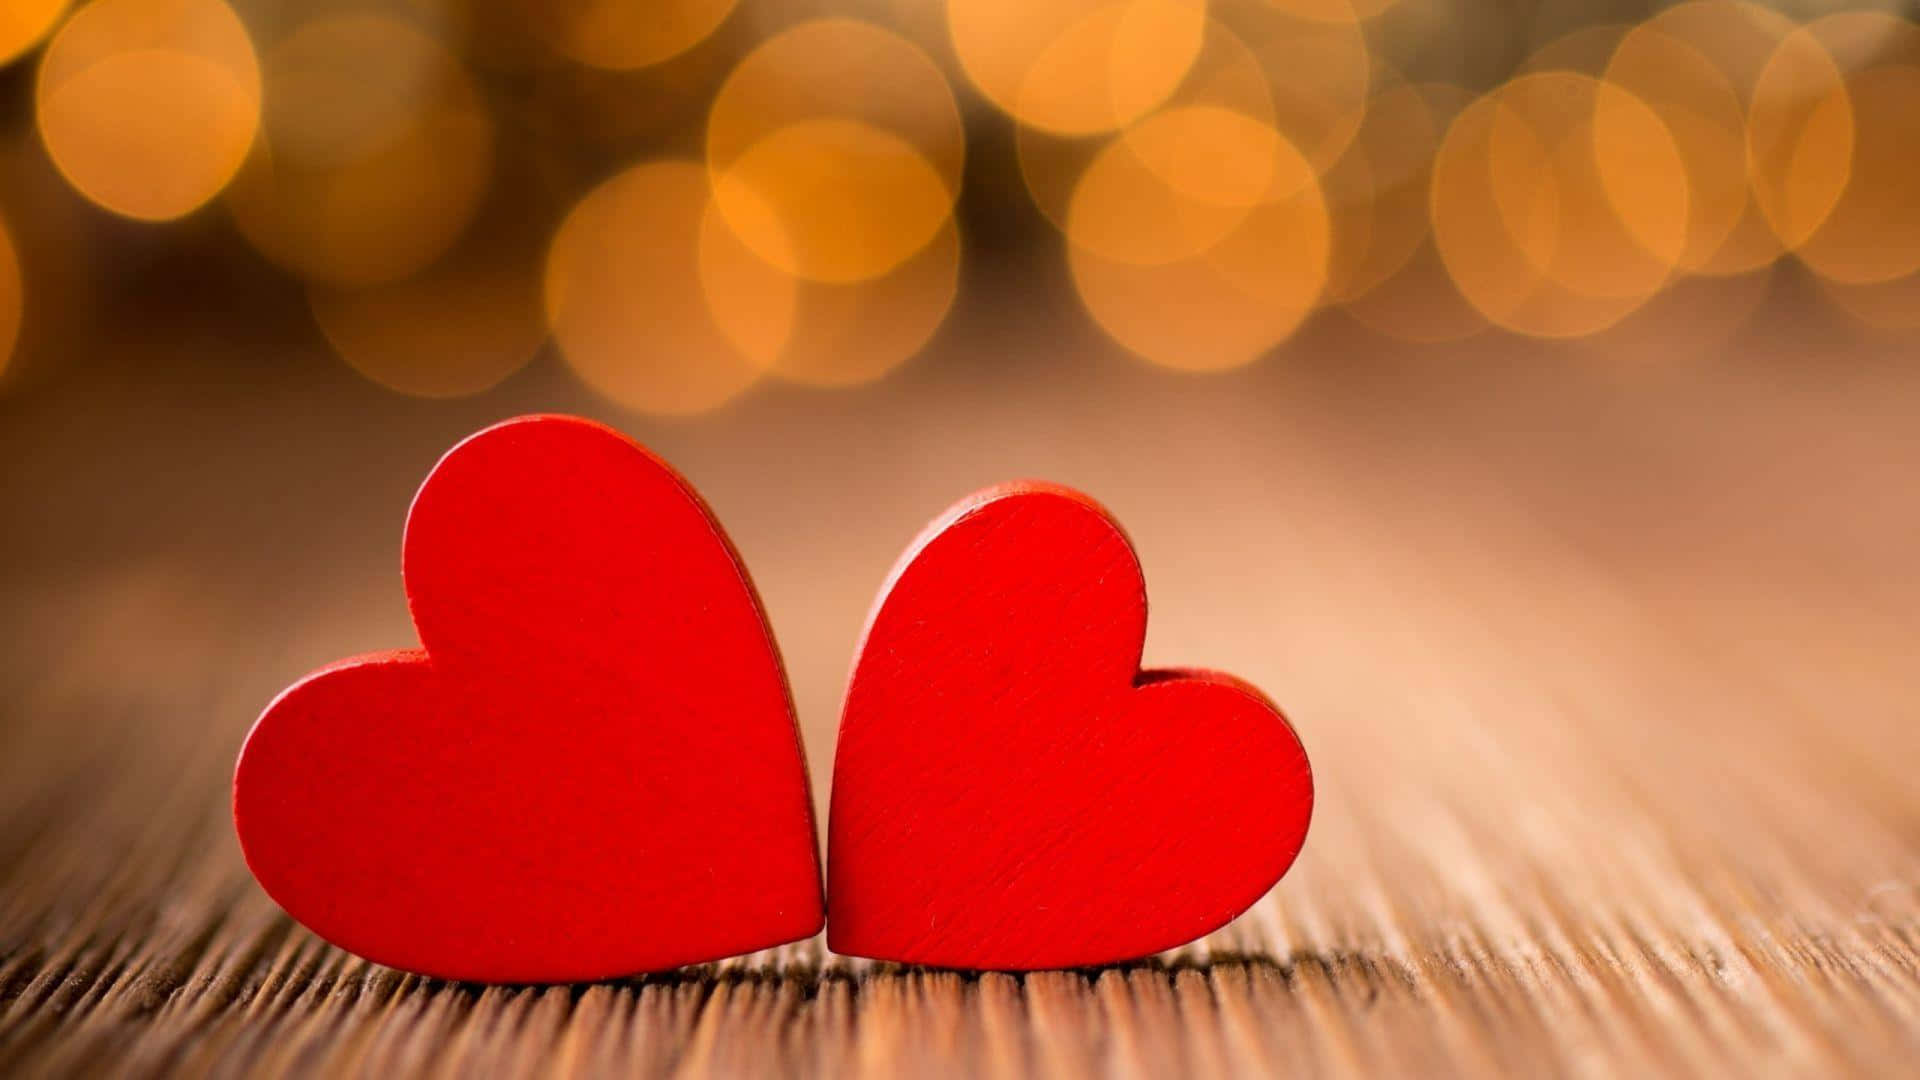 Two Red Hearts On A Wooden Table With Bokeh Background Wallpaper